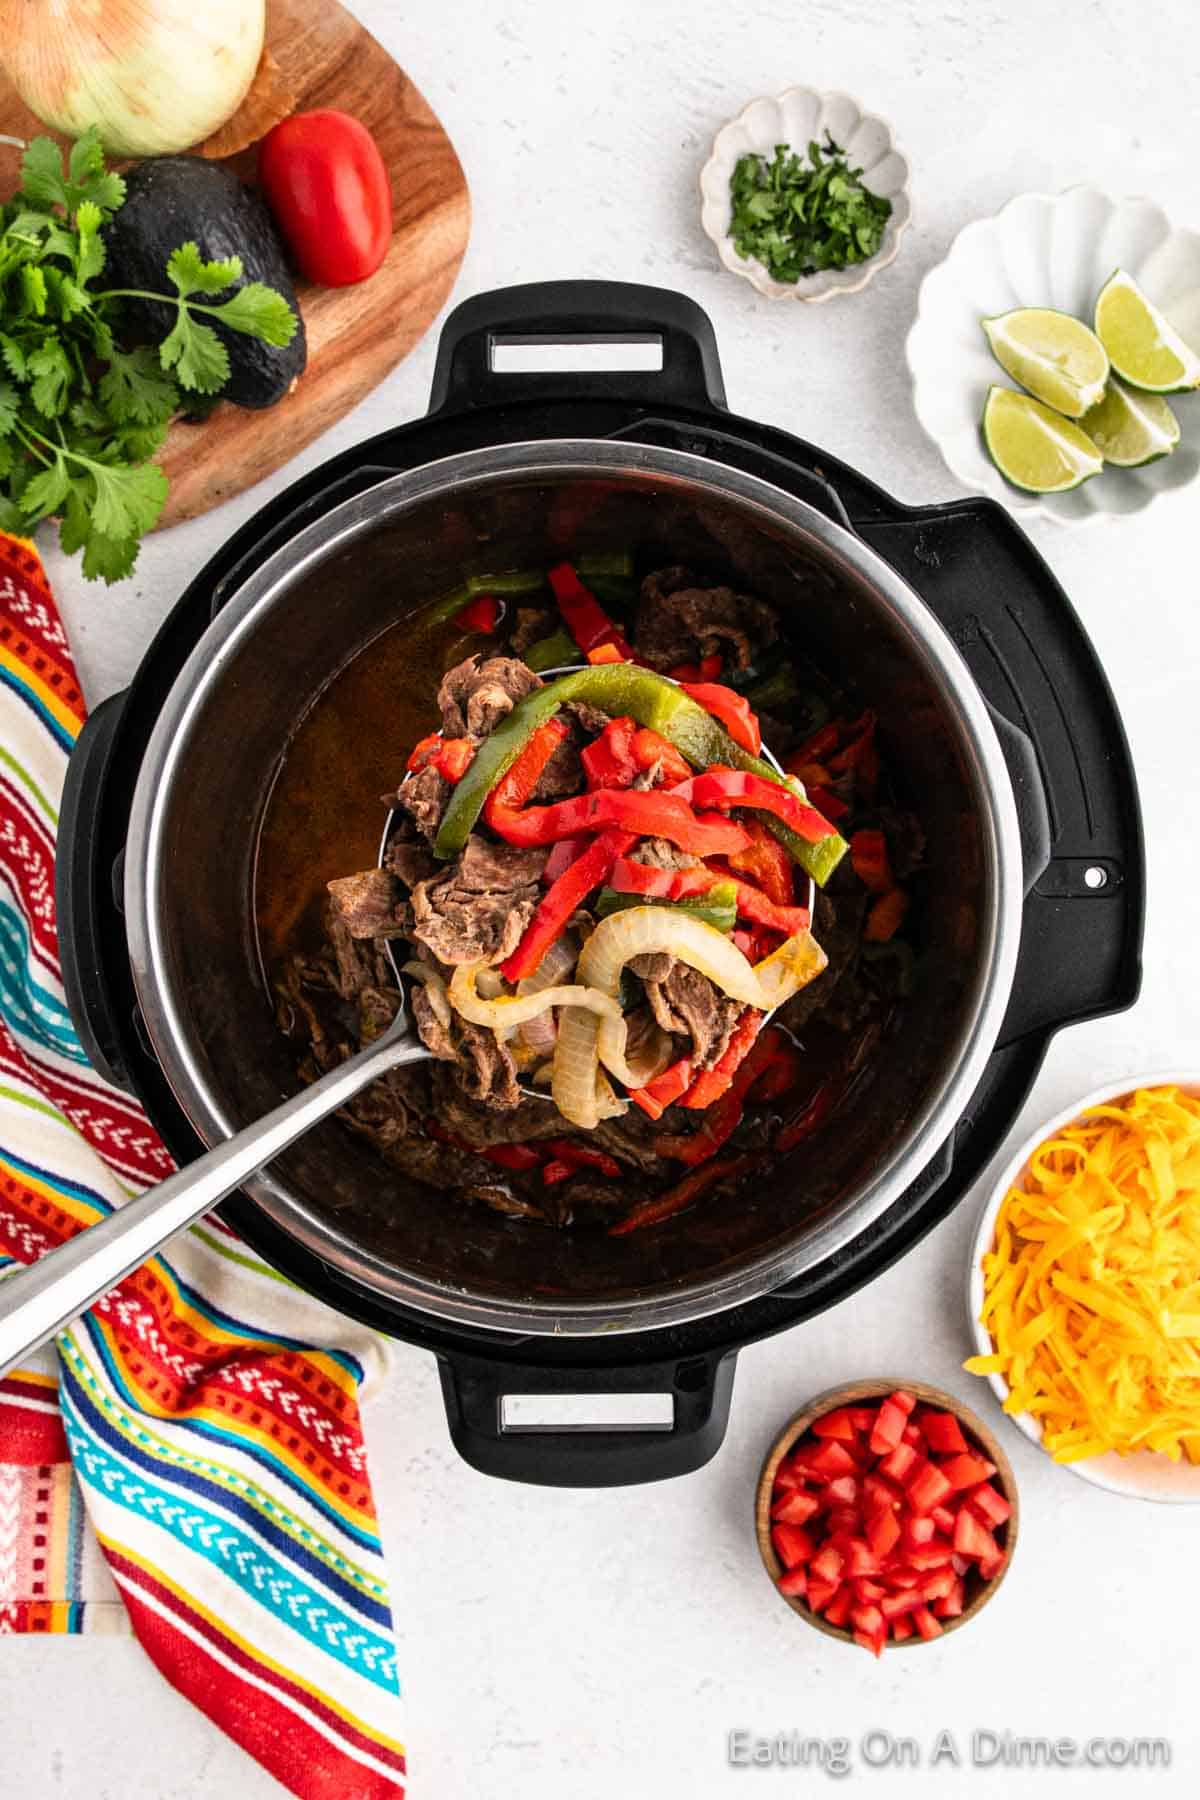 A serving of steak fajitas on a large spoon with red and green bell peppers in the instant pot